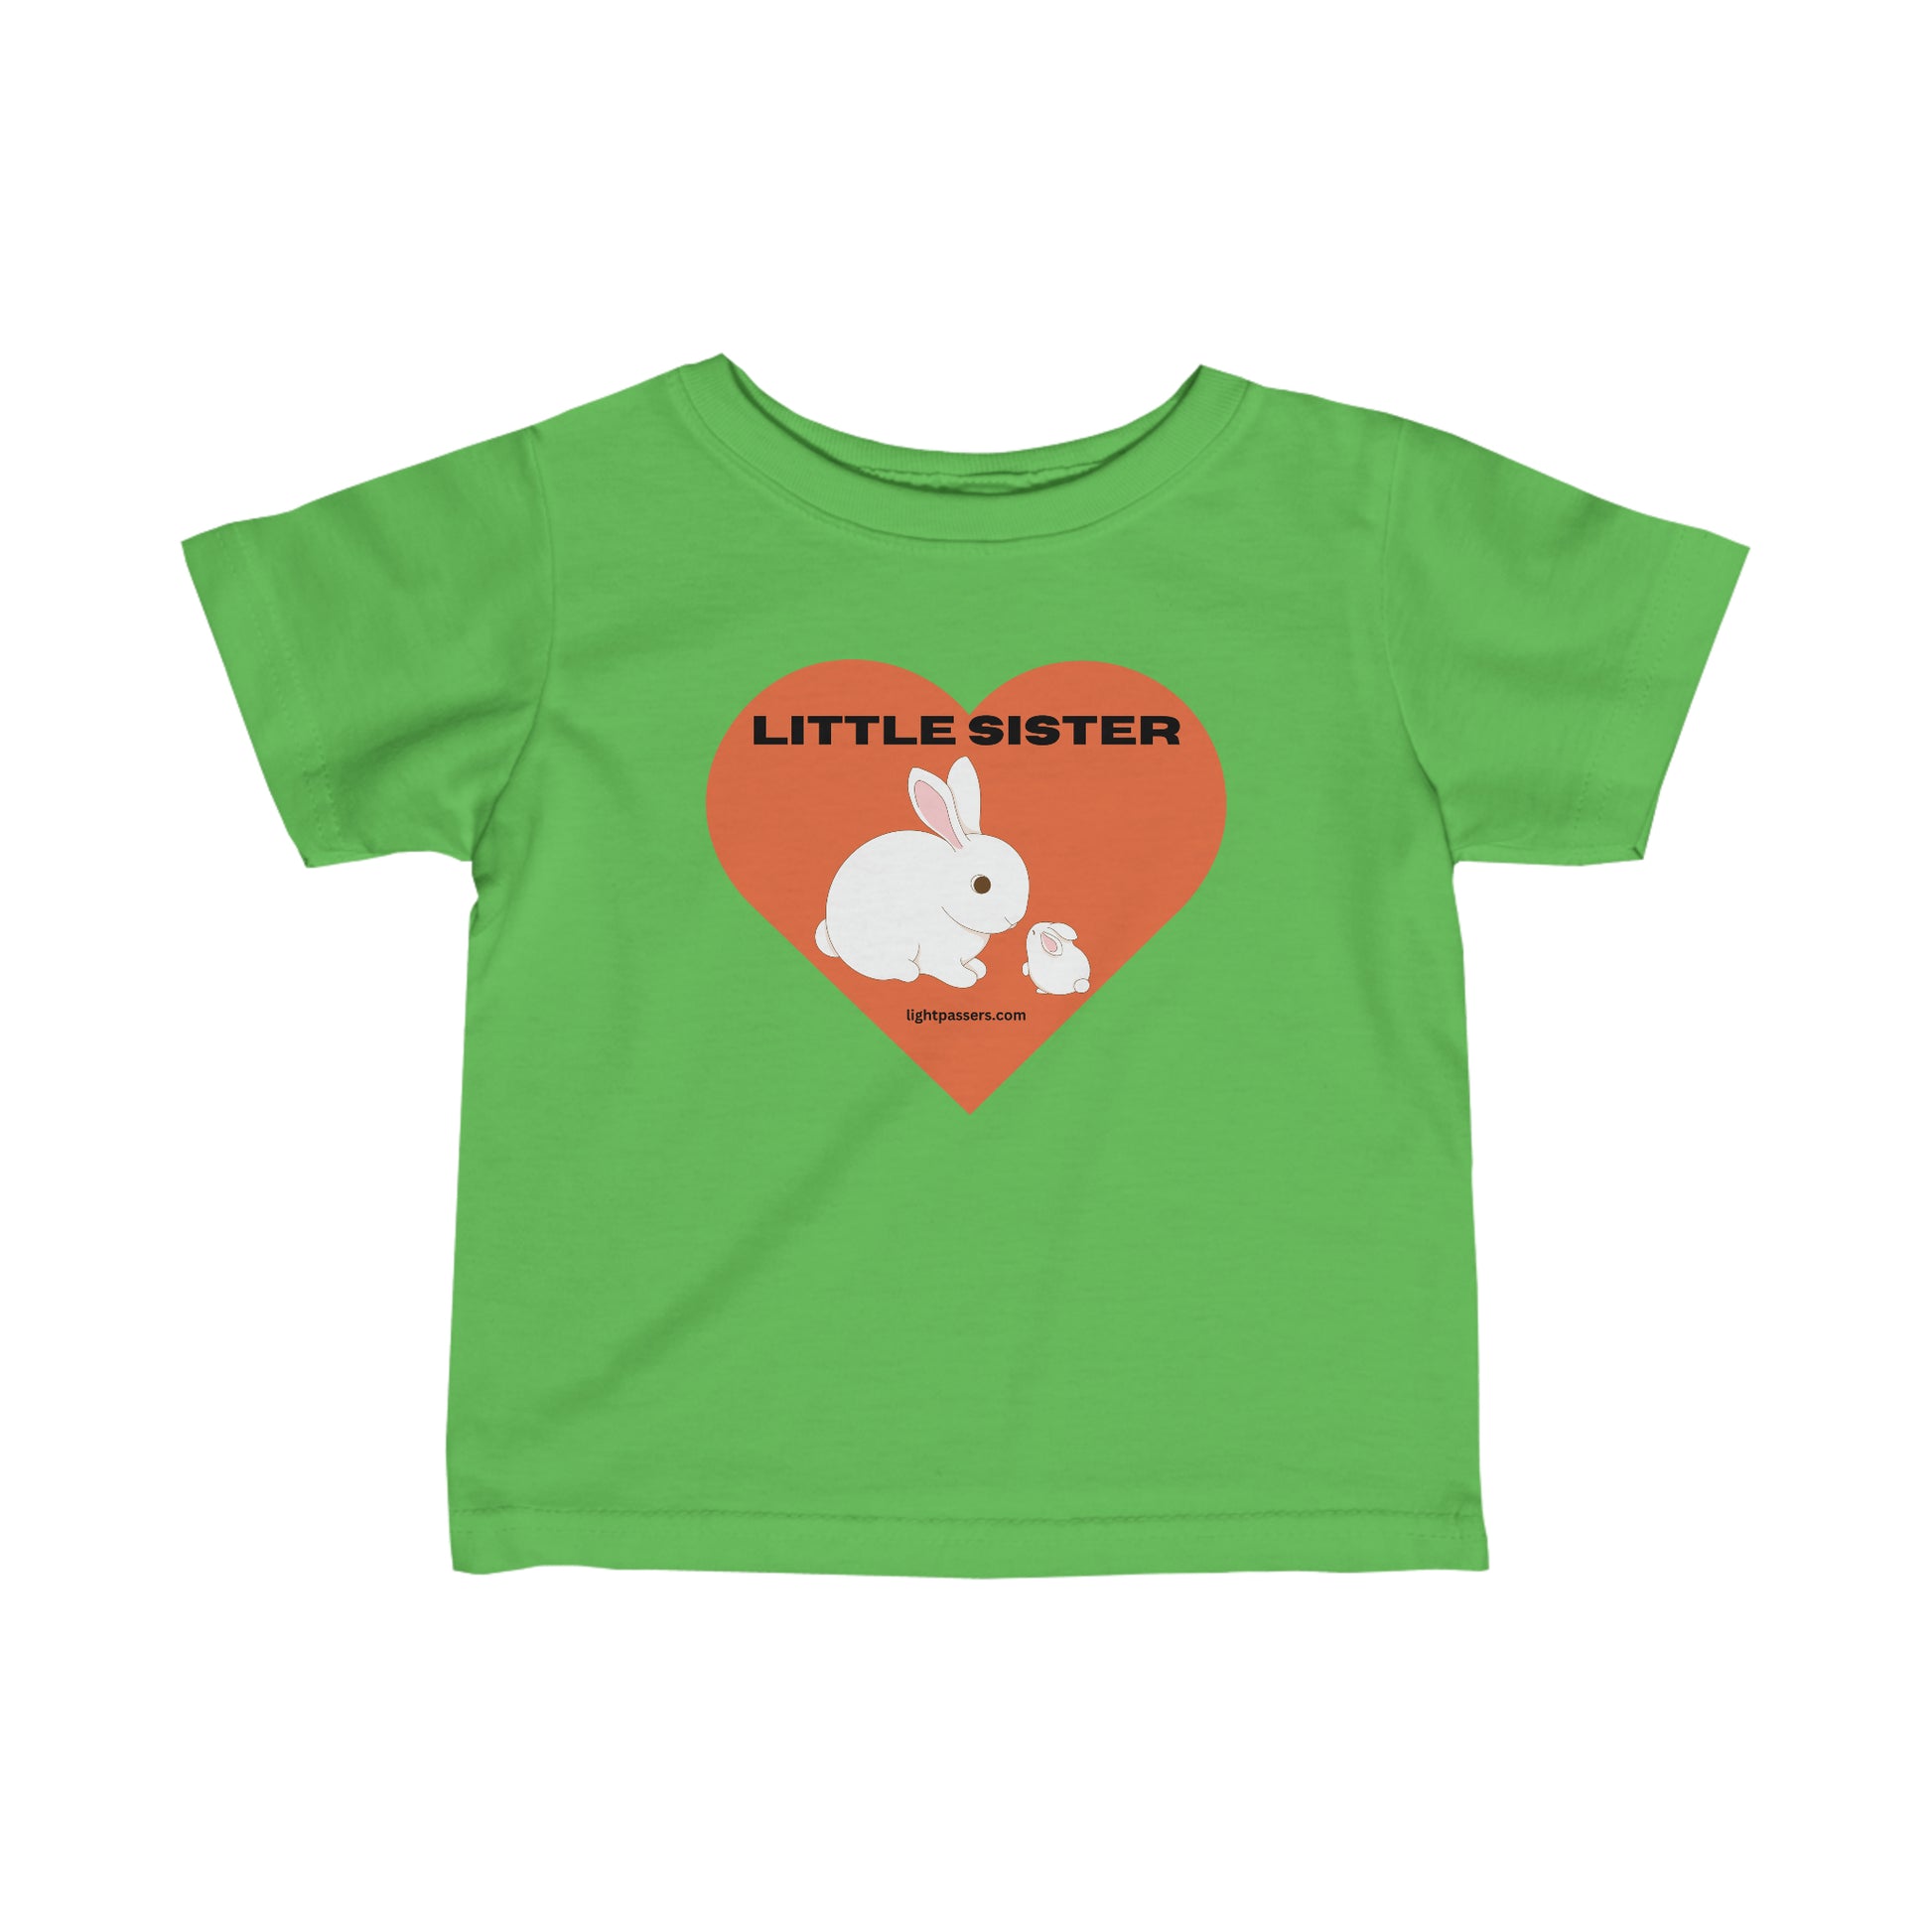 A green shirt featuring a white rabbit and heart design, ideal for little sisters. Infant fine jersey tee with side seams, ribbed knitting, and taped shoulders for durability and comfort.